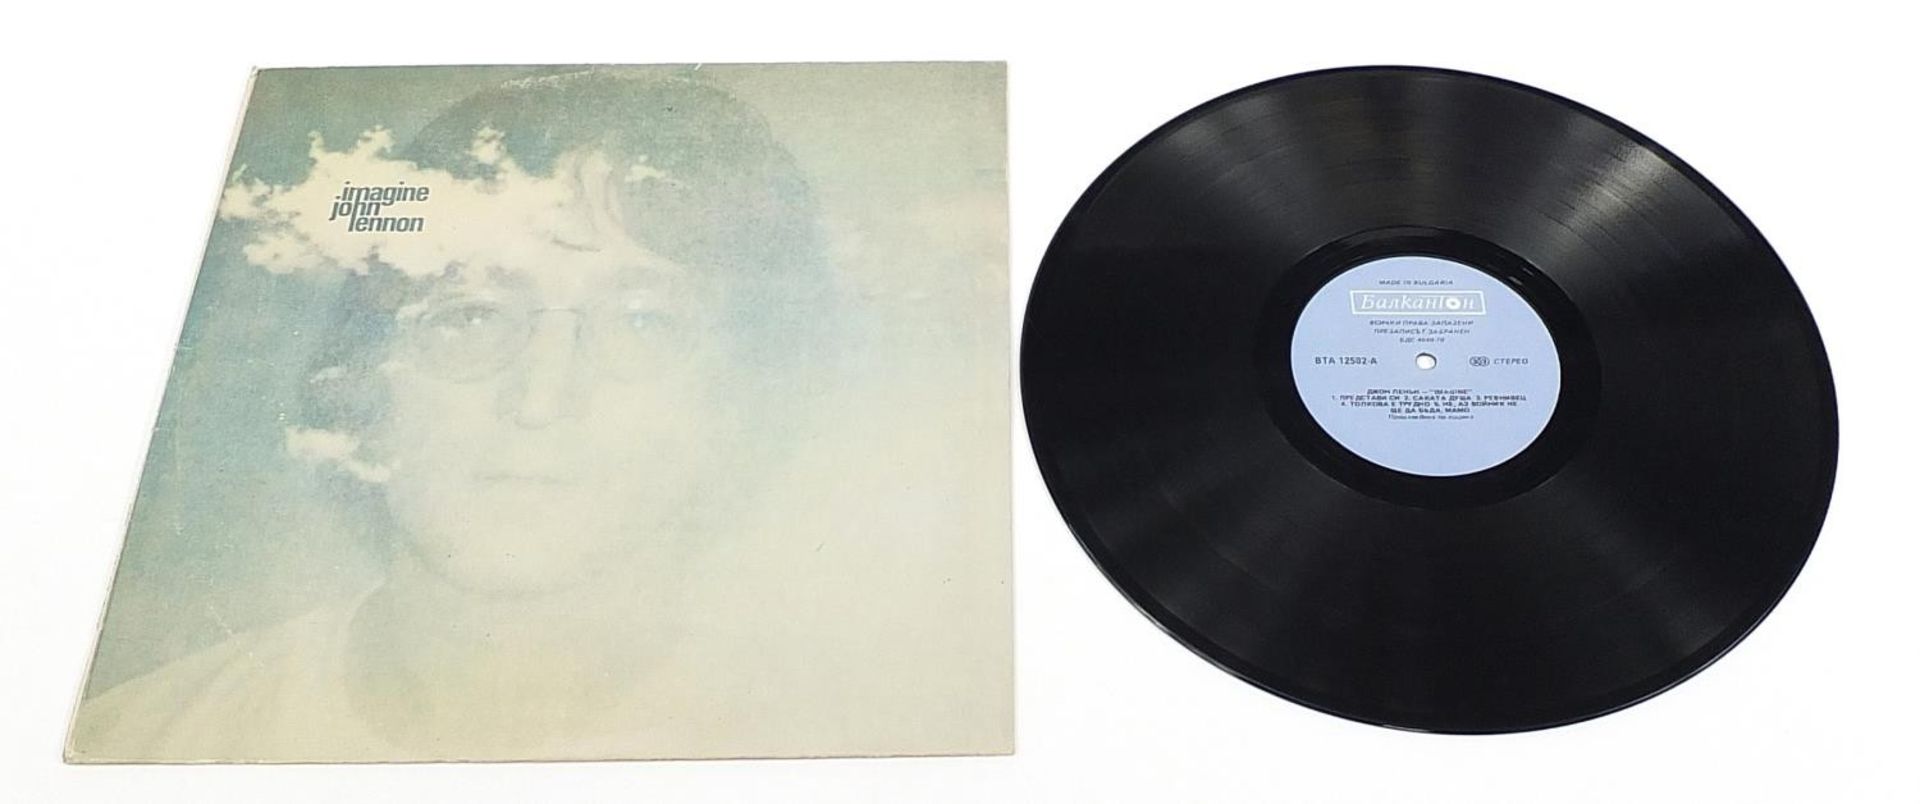 The Beatles, John Lennon & Yoko Ono vinyl LP records including Walls and Bridges with poster, - Image 22 of 41